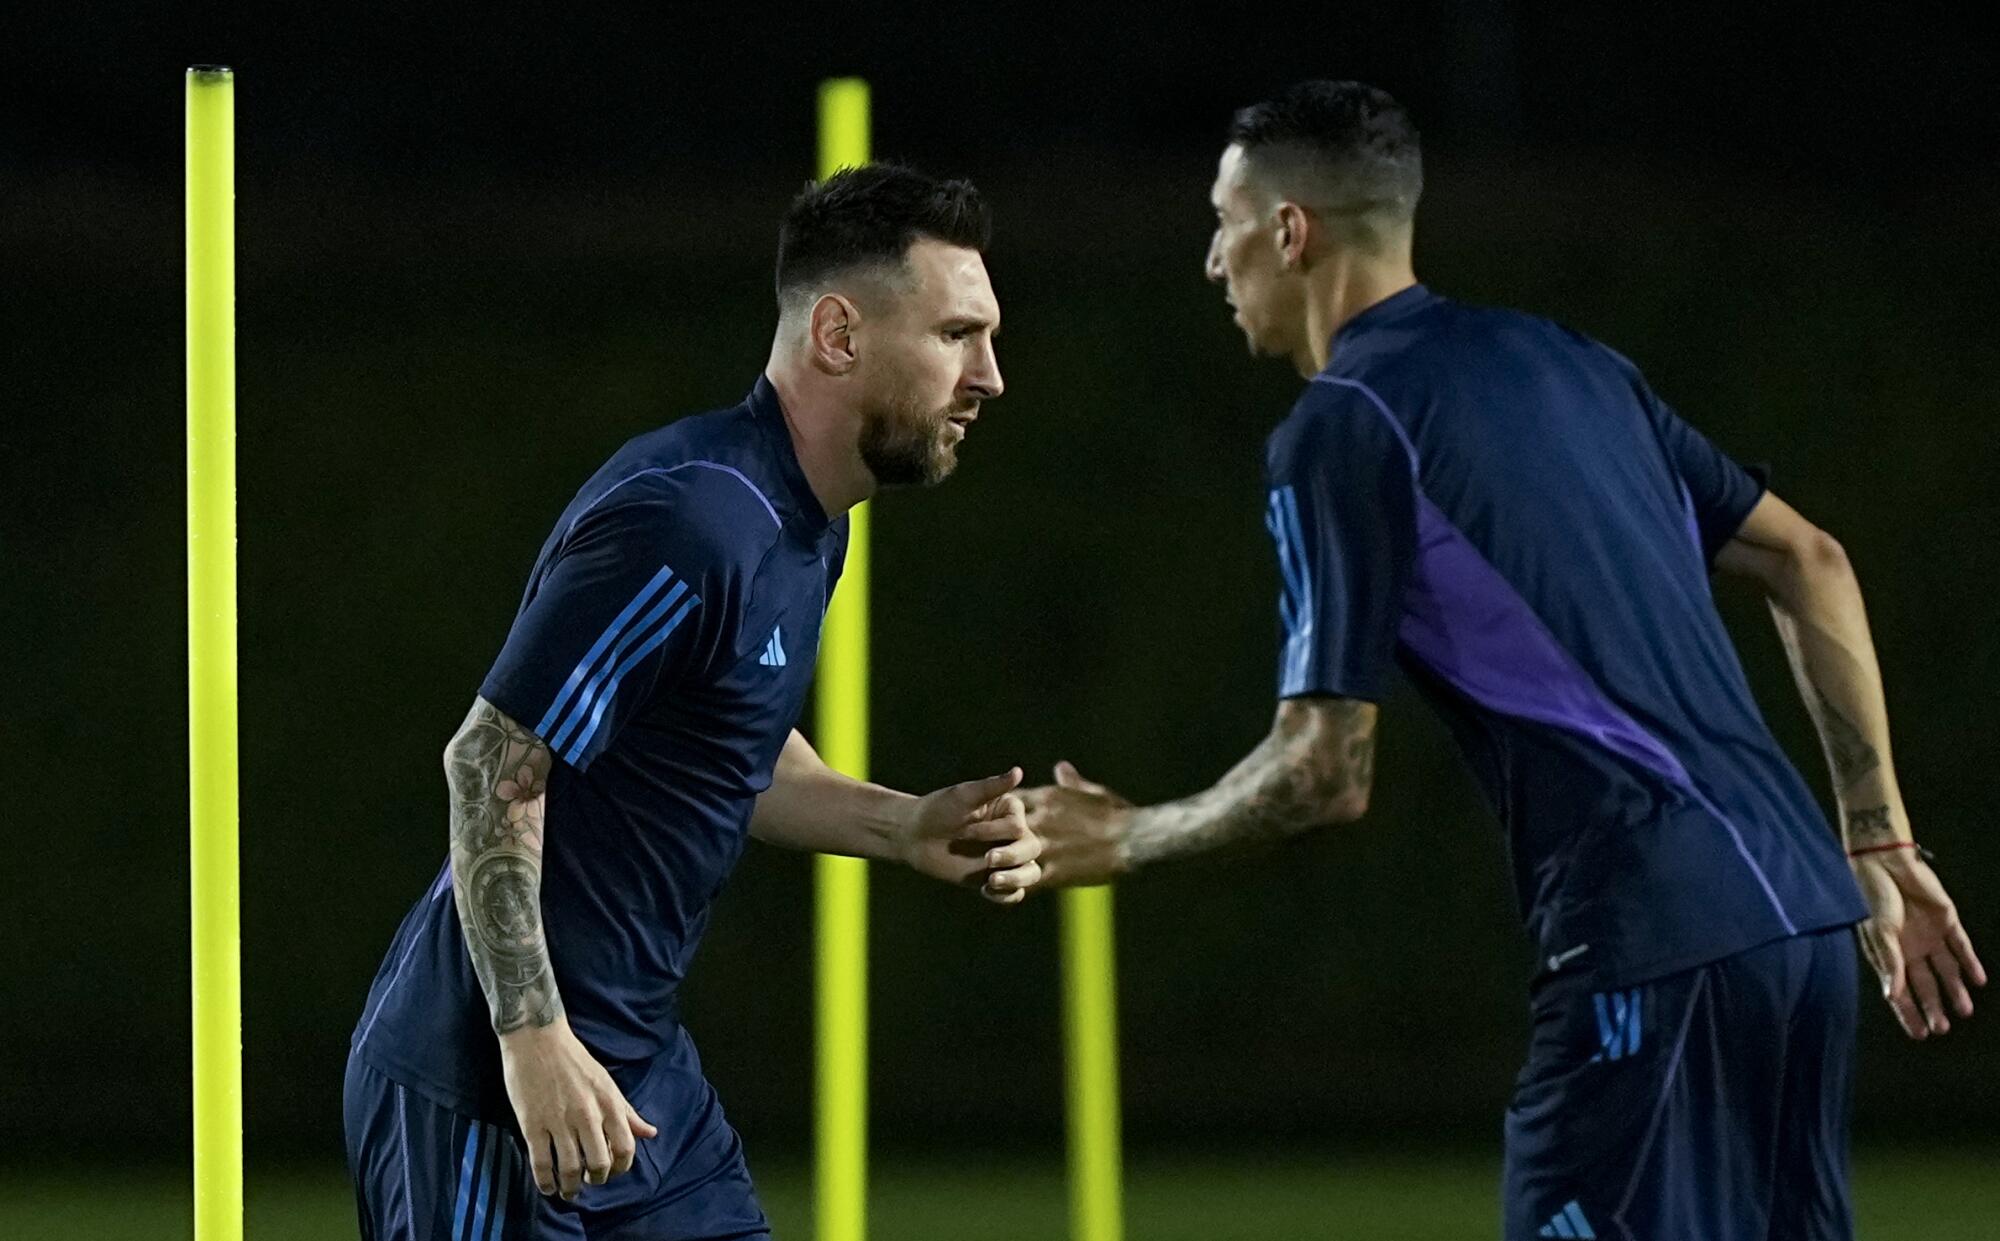 Argentina's Lionel Messi, left, and Angel Di Maria warm up during a training session Thursday in Doha, Qatar.